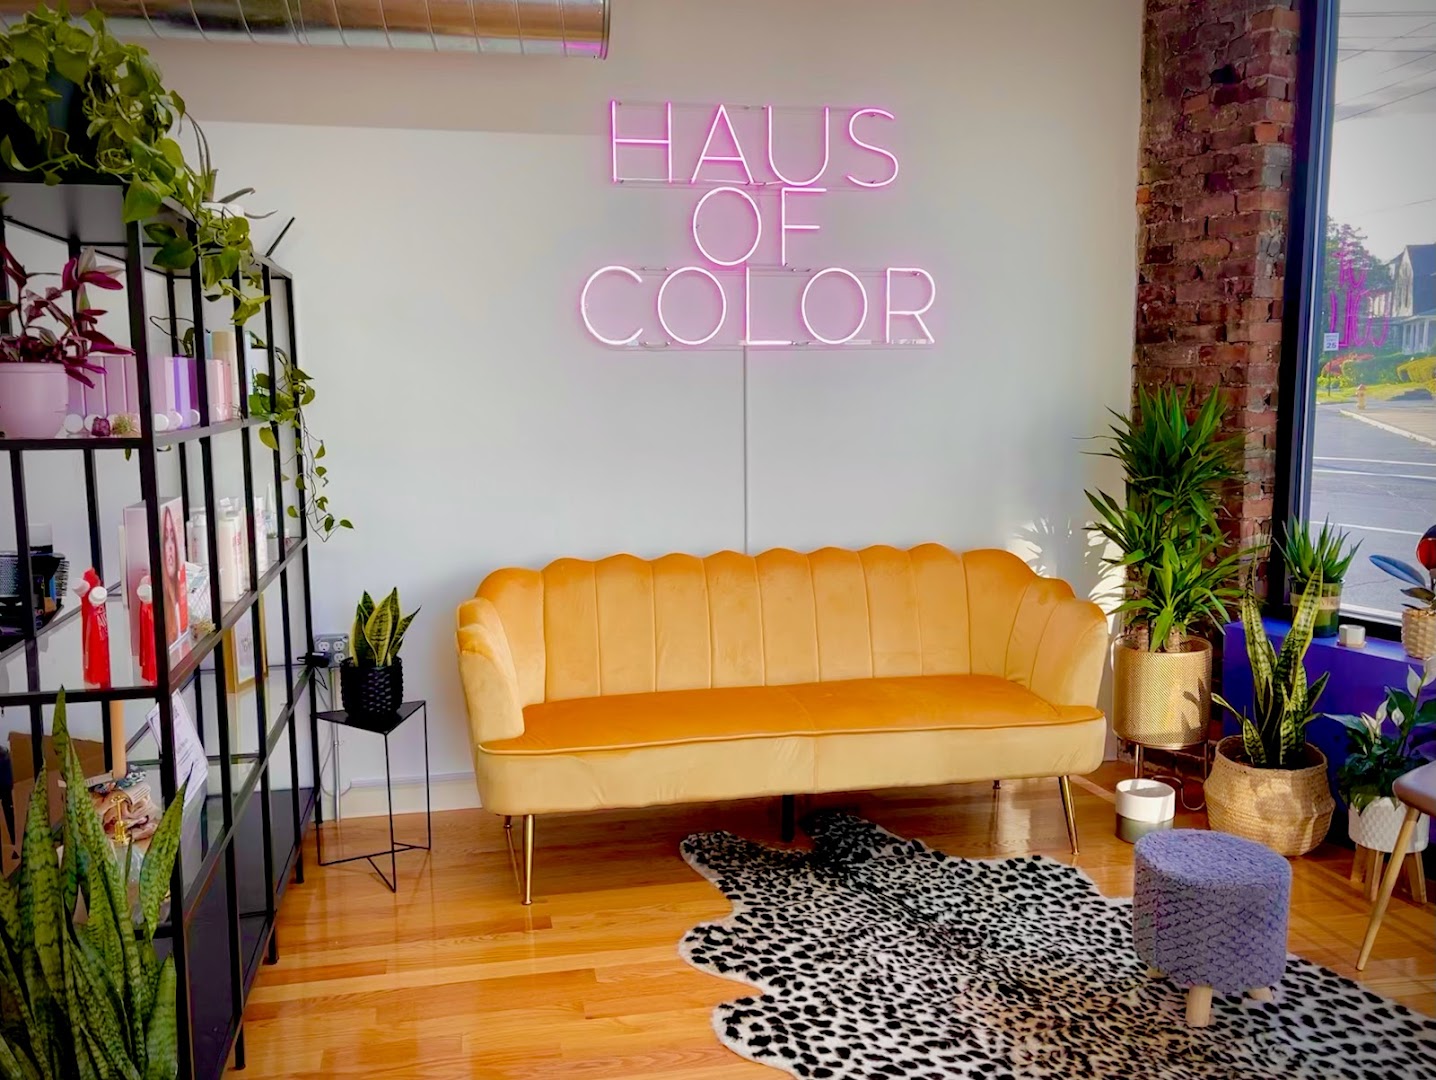 Haus of Color